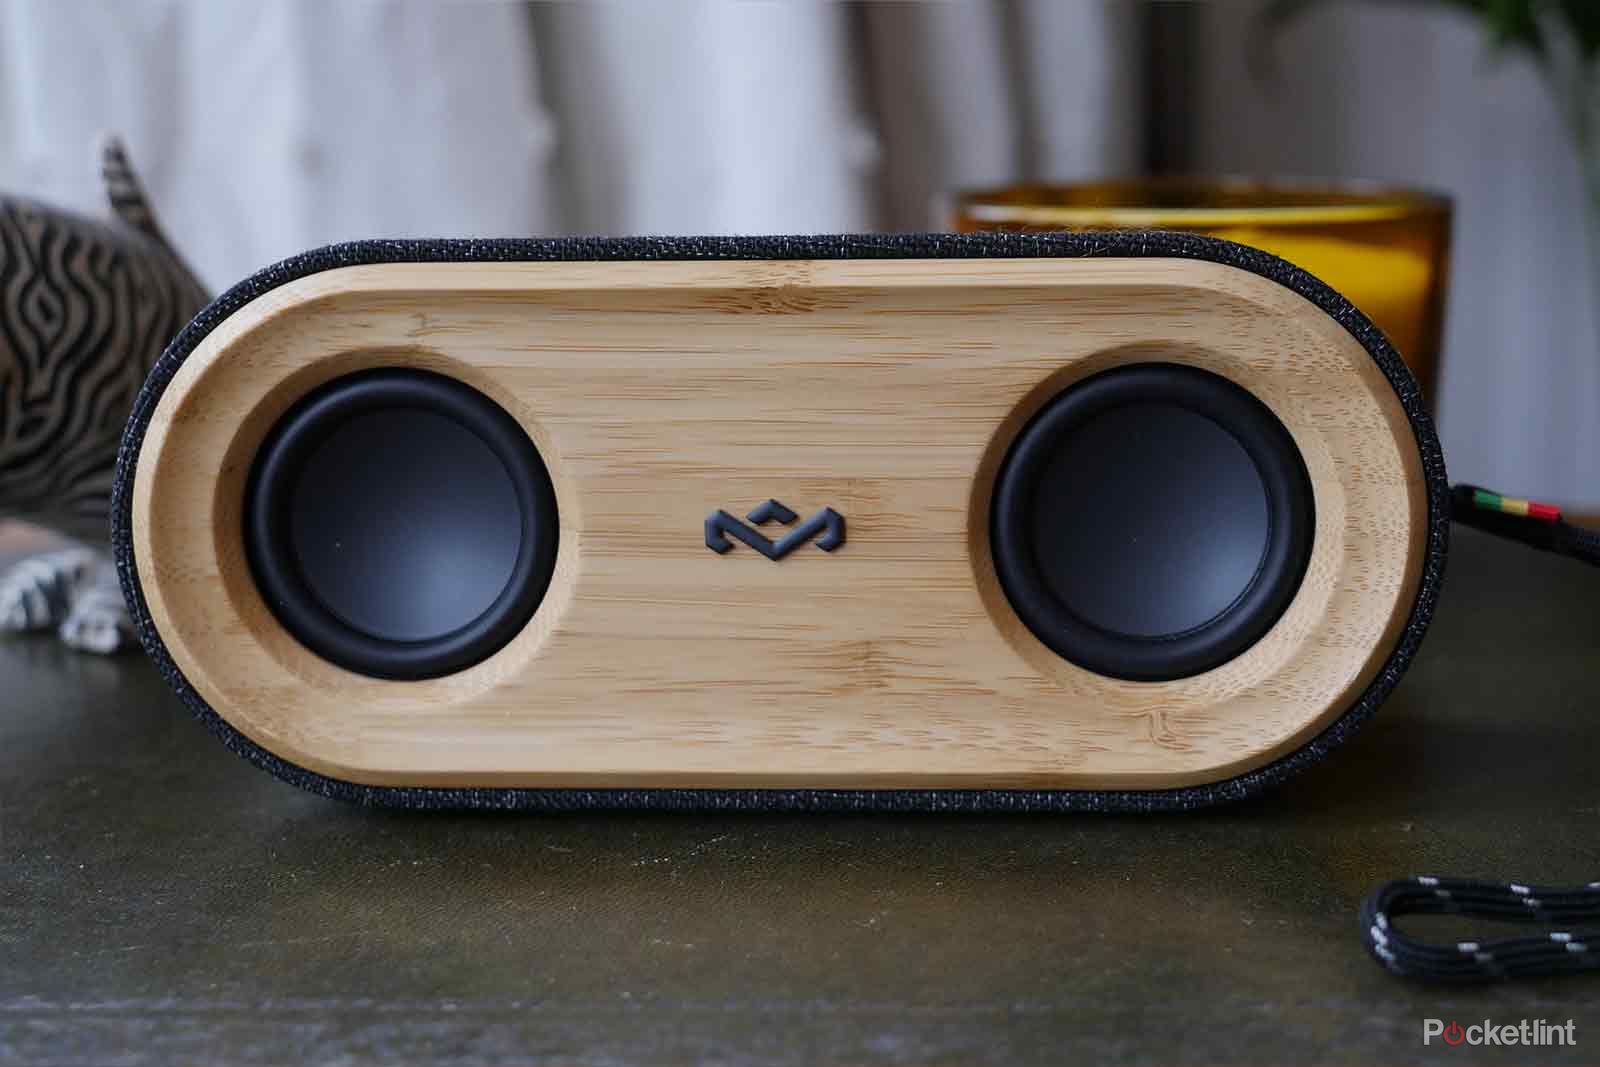 House of Marley Get Together 2 and Get Together Mini speakers review